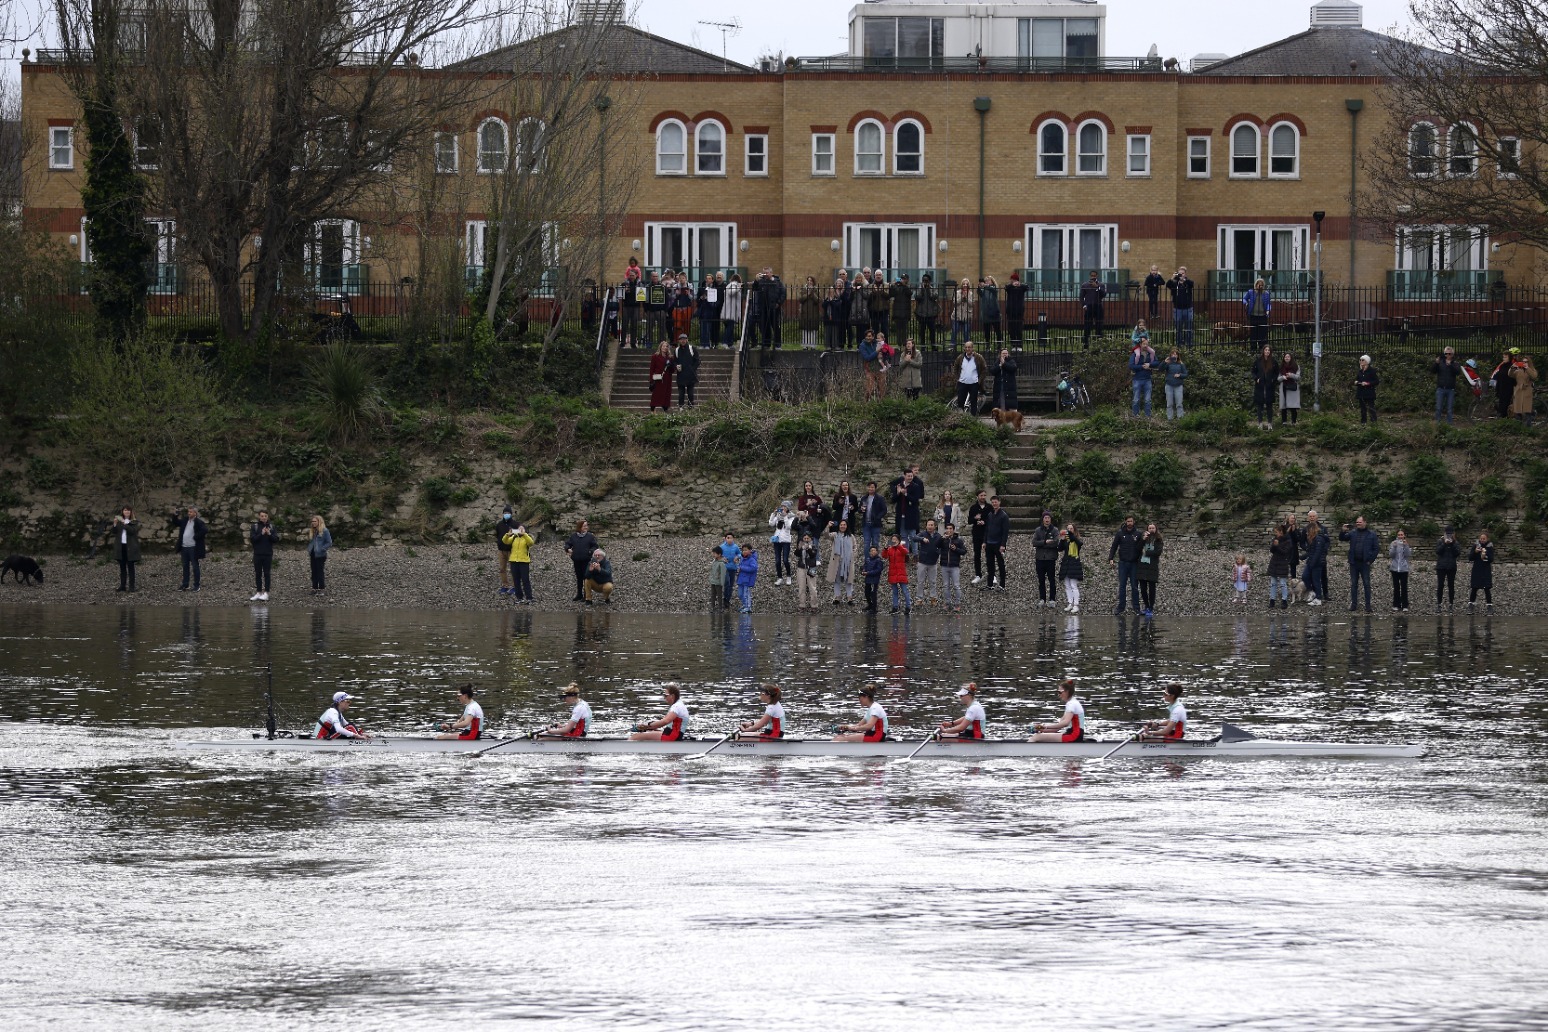 Cambridge have won the Women’s Boat Race for the fifth time in a row. 